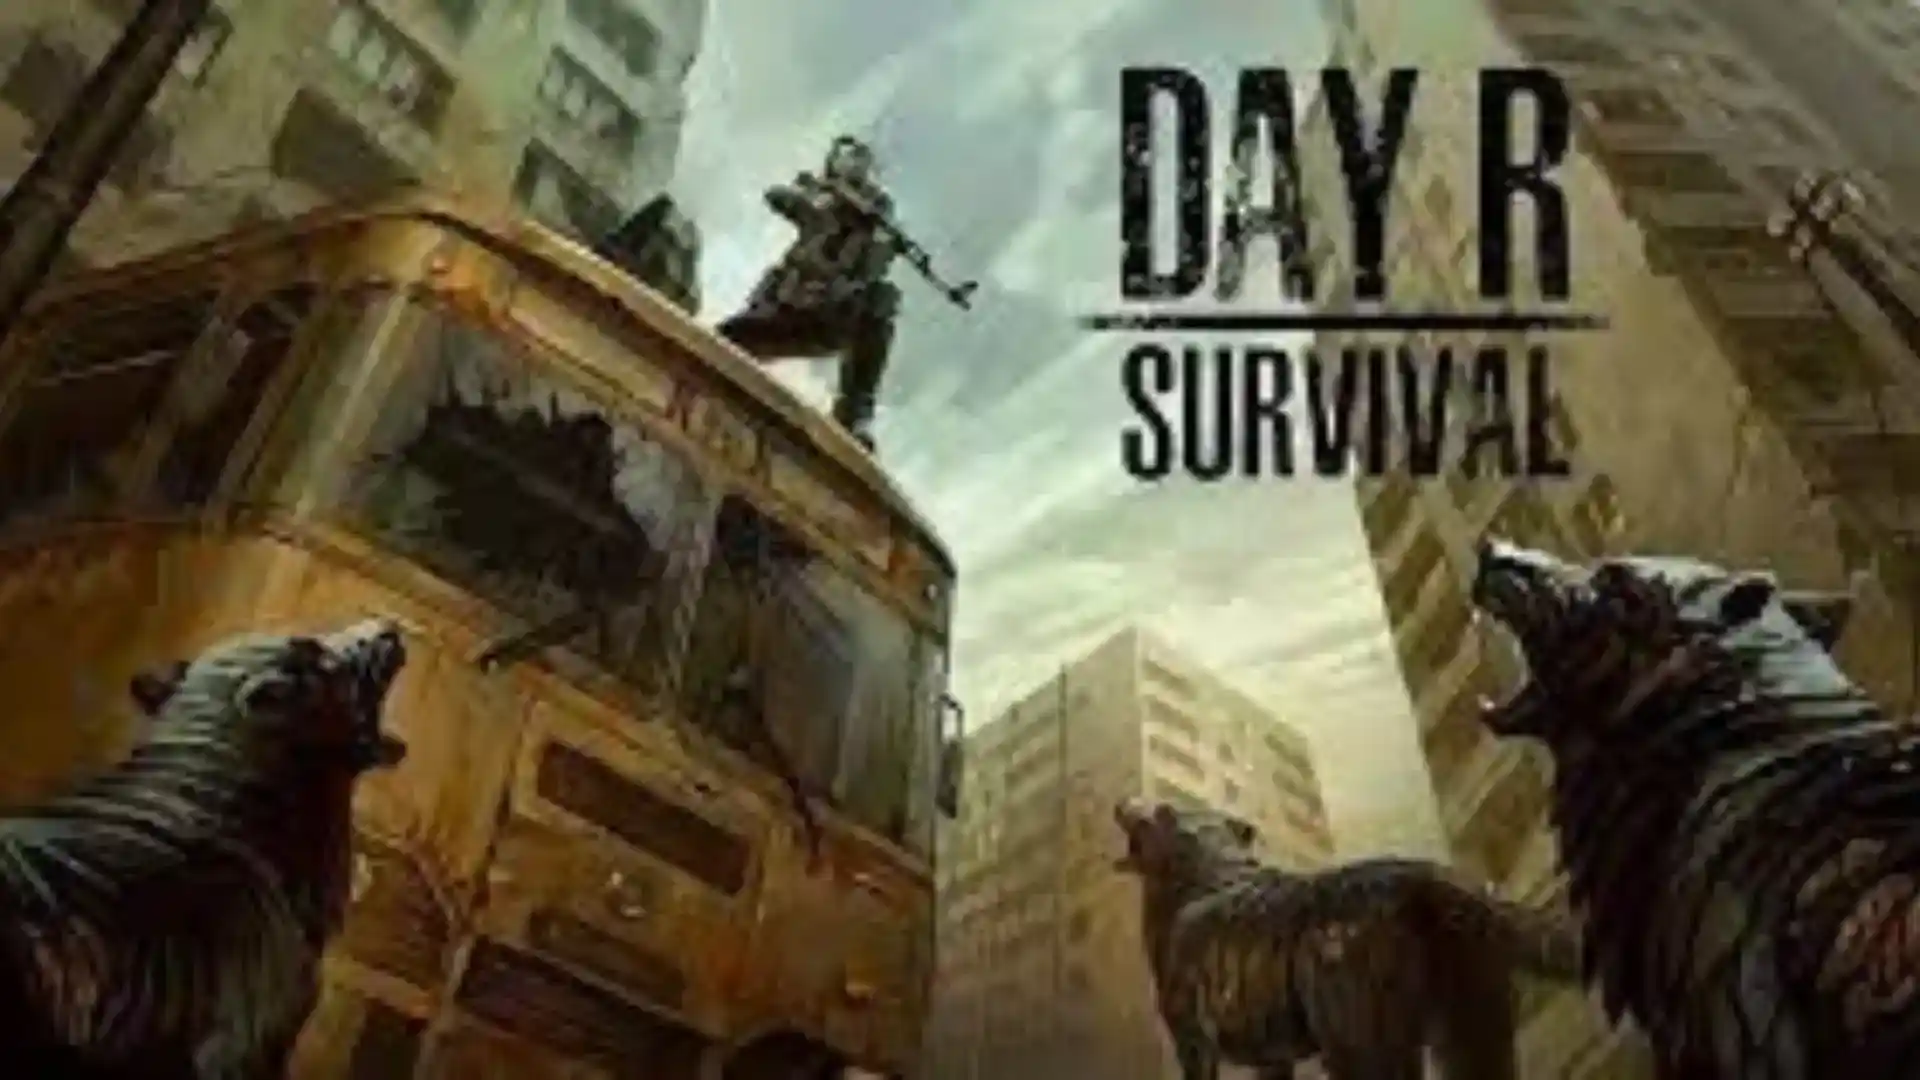 Day R Survival Feature